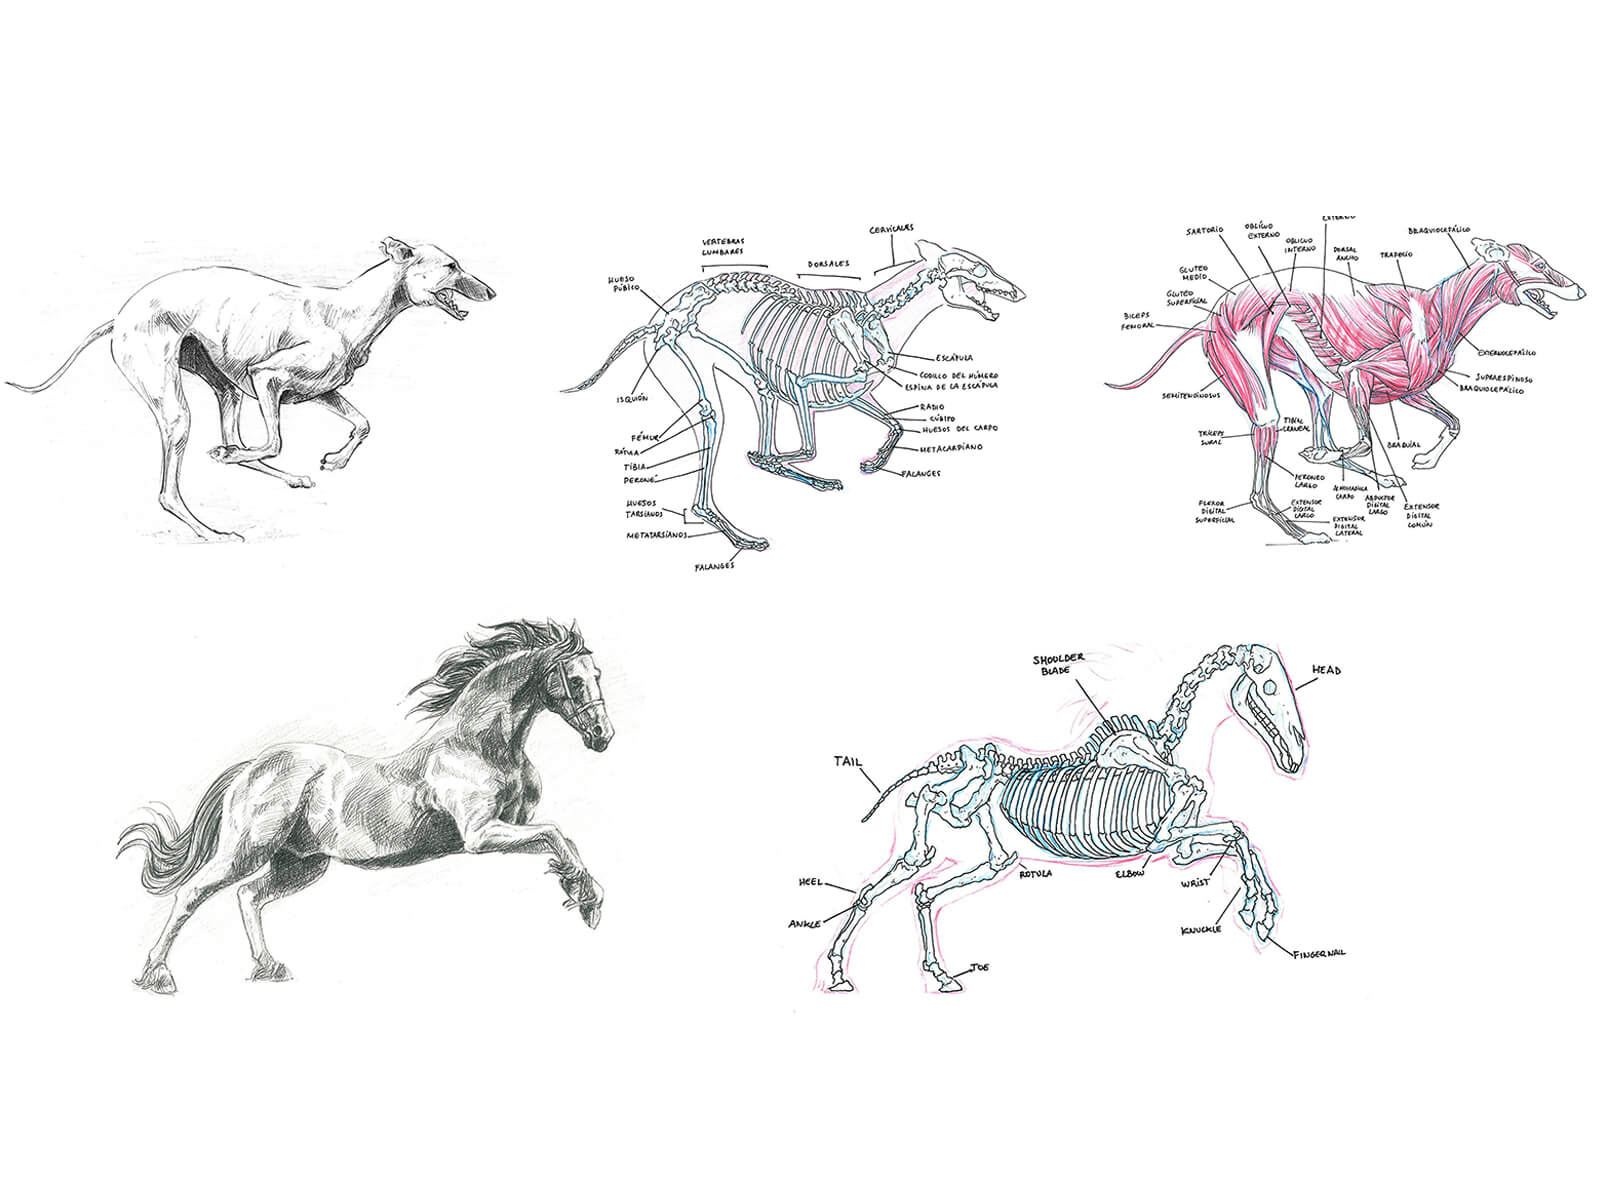 Black-and-white sketches of a dog and horse mid-run/gallop and cross-sections of their skeletal and muscular systems.